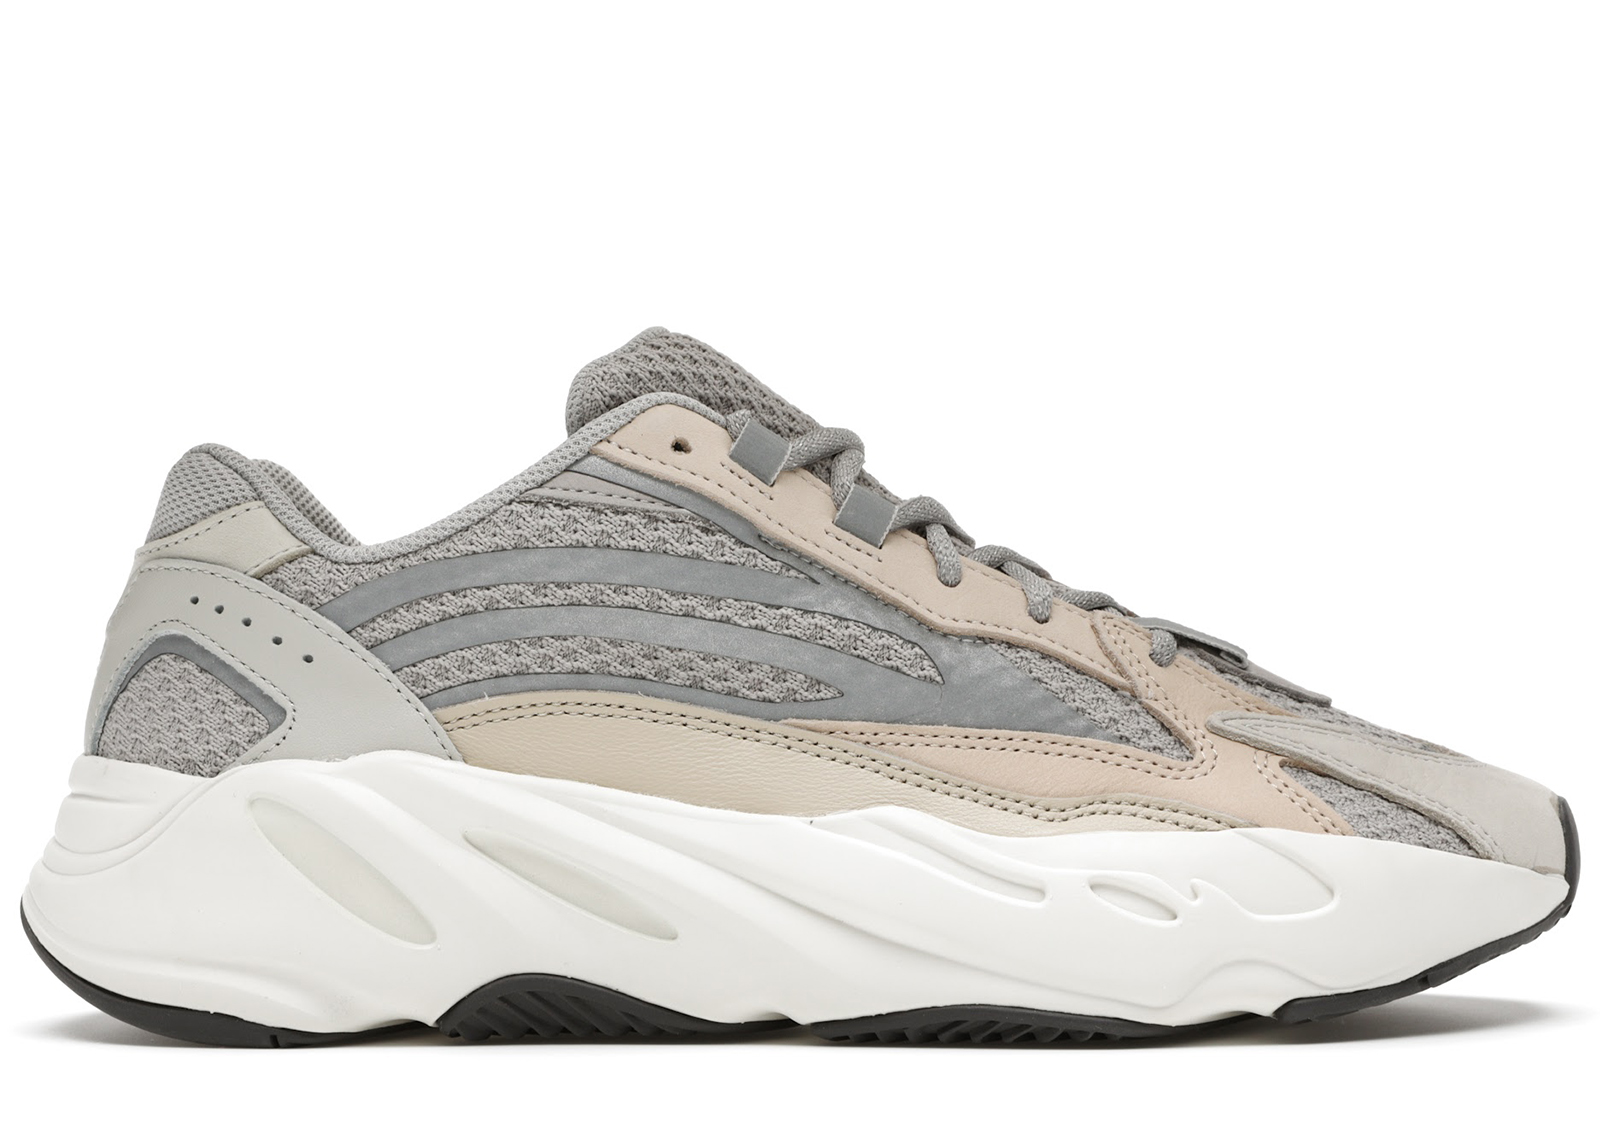 Buy adidas Yeezy 700 v2 Shoes & Deadstock Sneakers